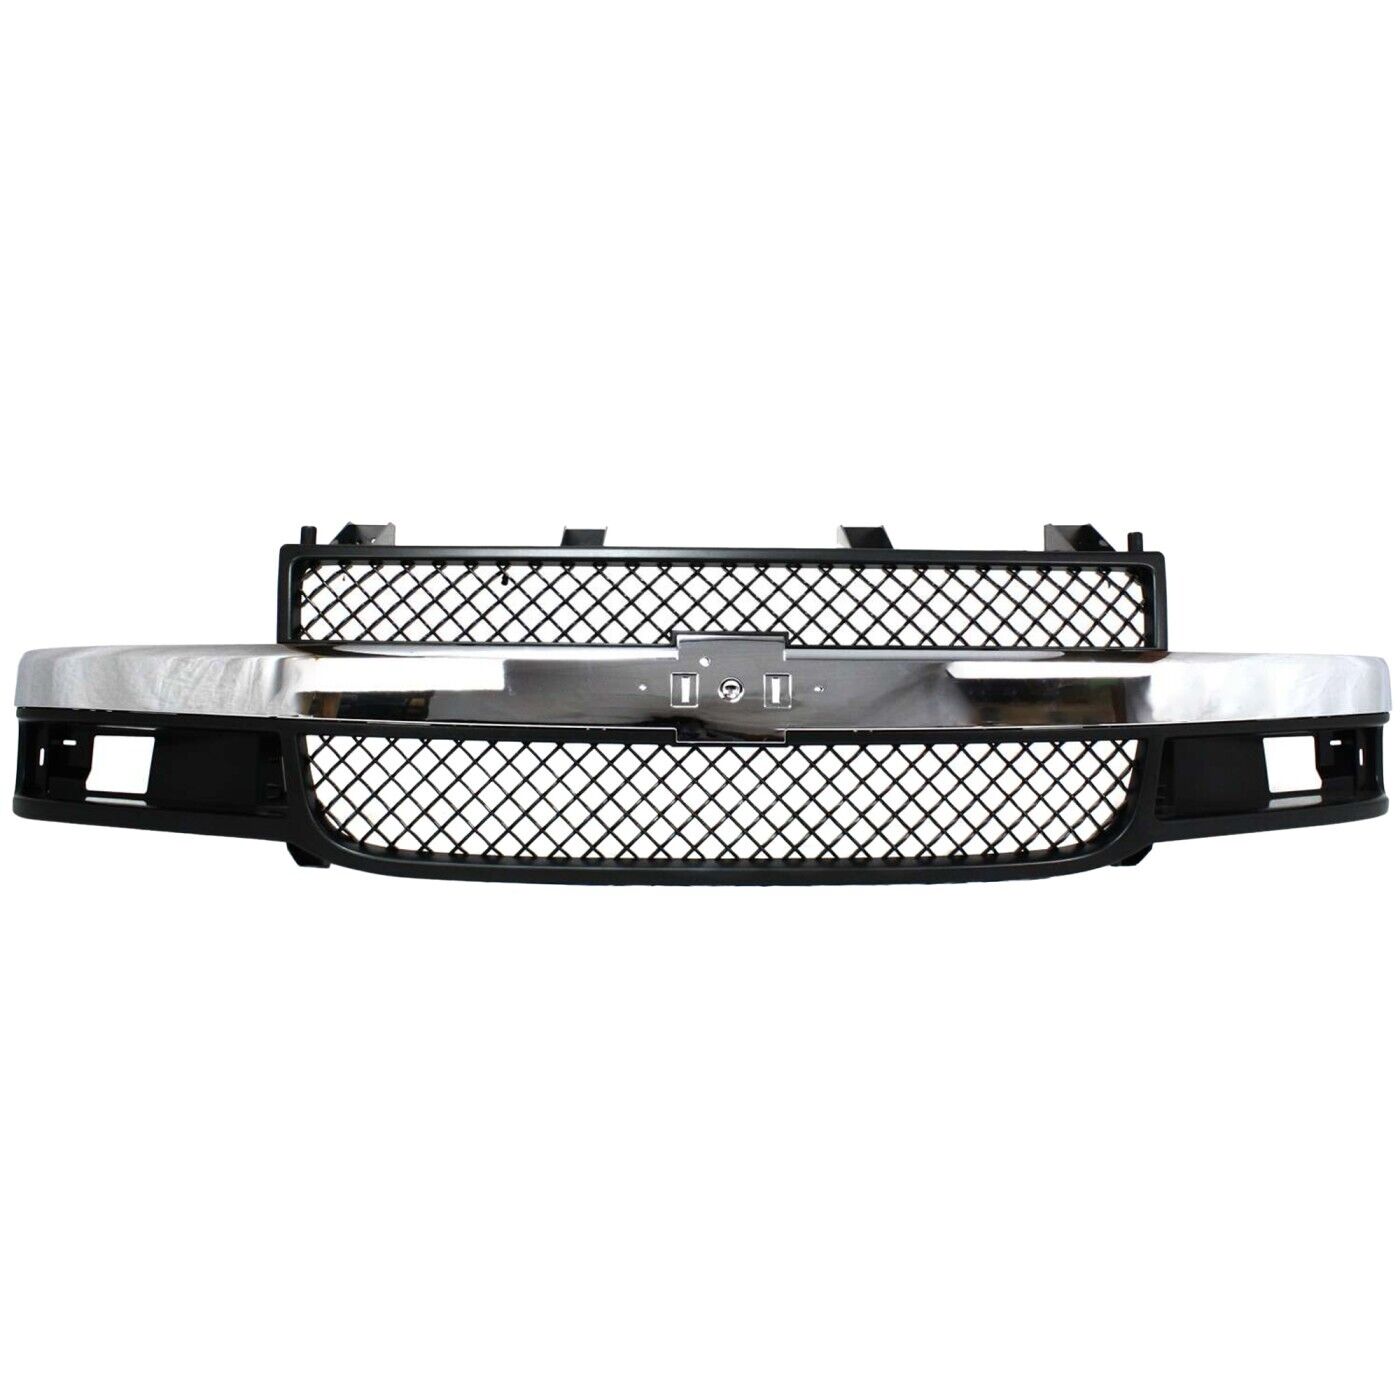 Grille Assembly For 2003-2017 Chevy Express 3500 w/ emblem provision